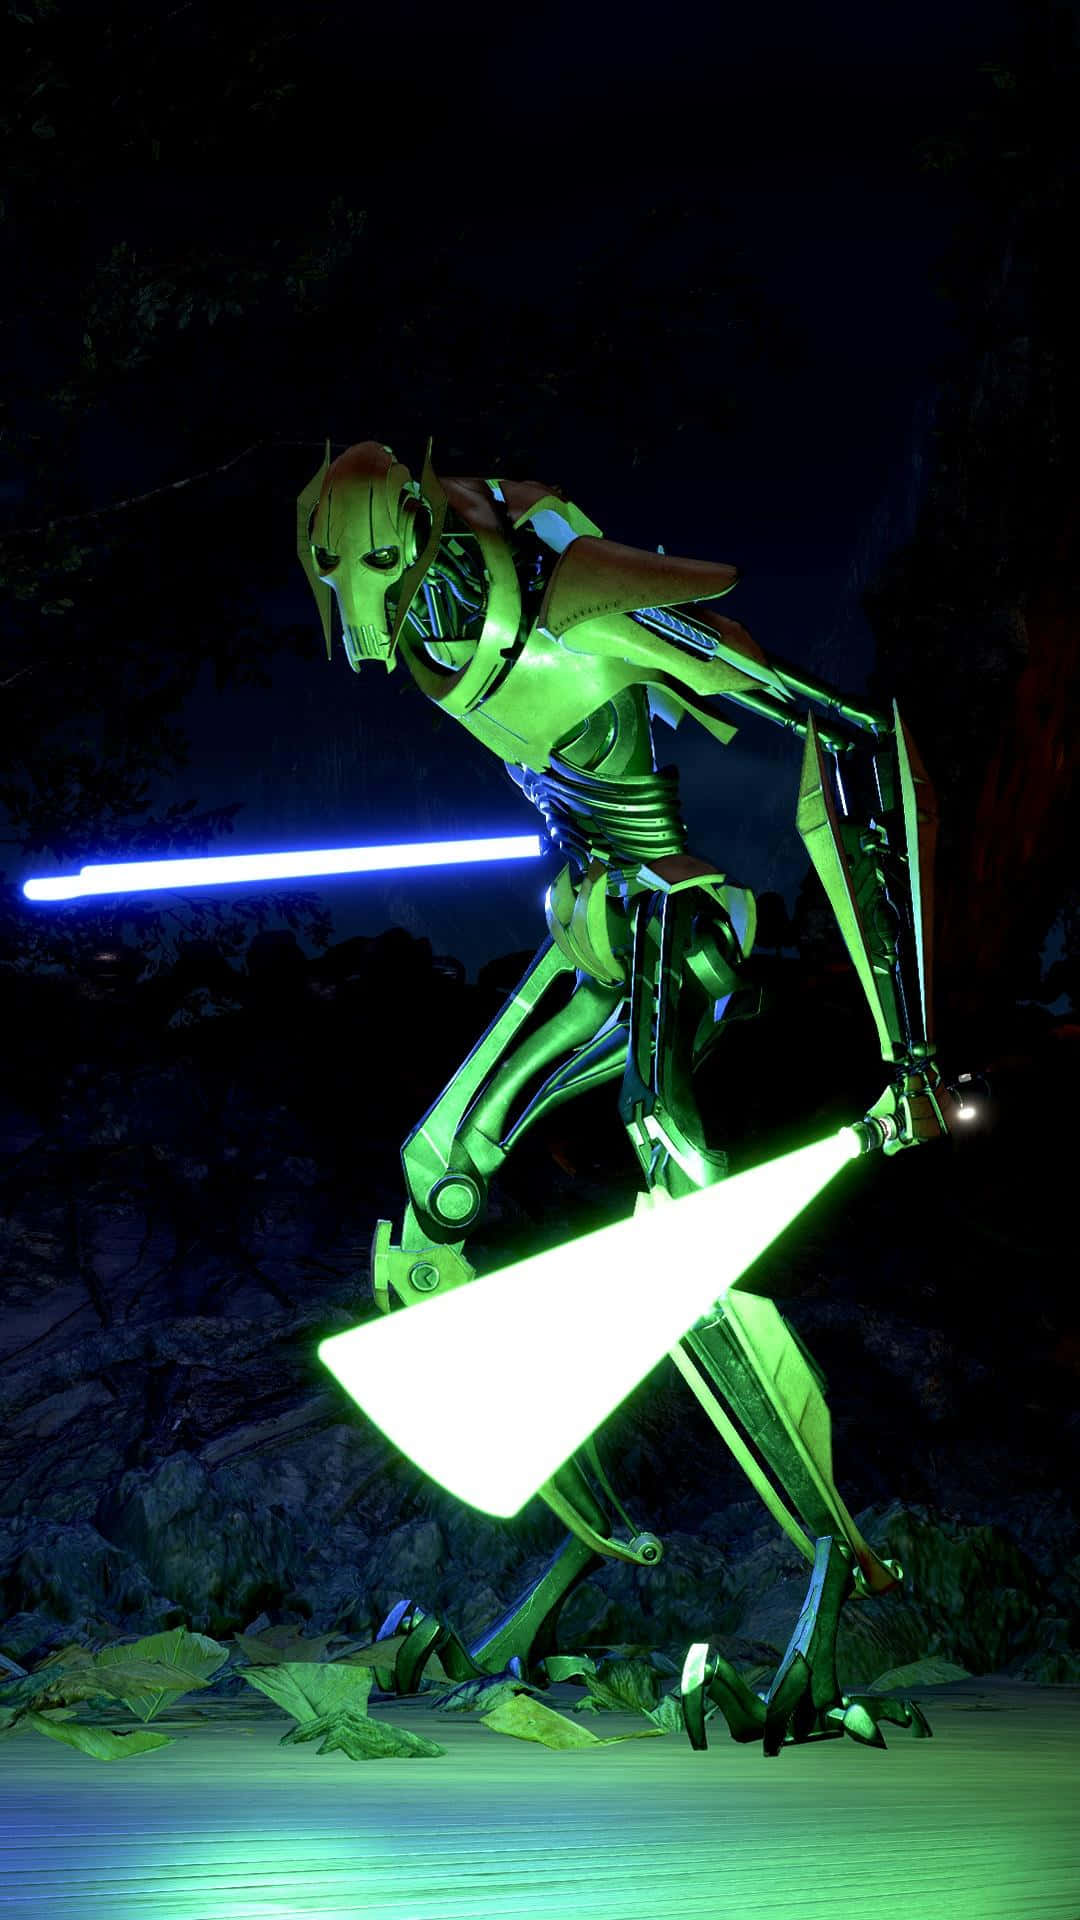 General Grievous, Robotic Commander Of The Separatist Droid Army